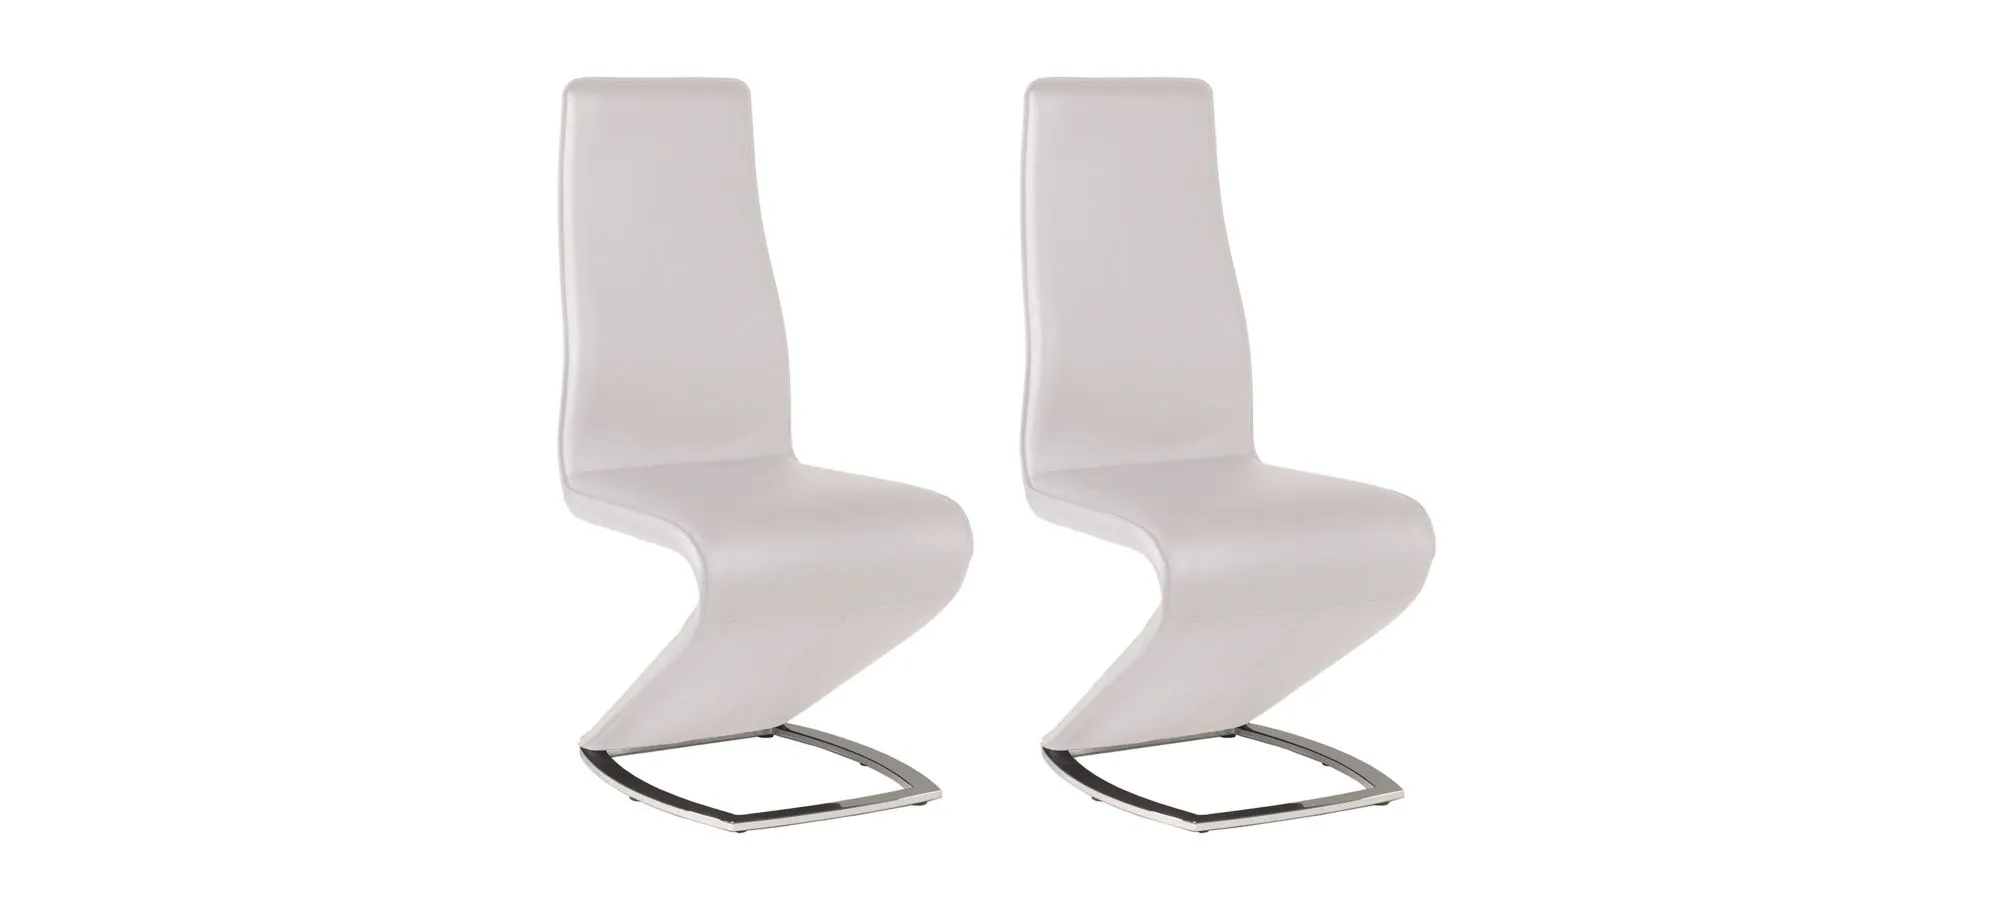 Tarra Dining Chair - Set of 2 in White by Chintaly Imports